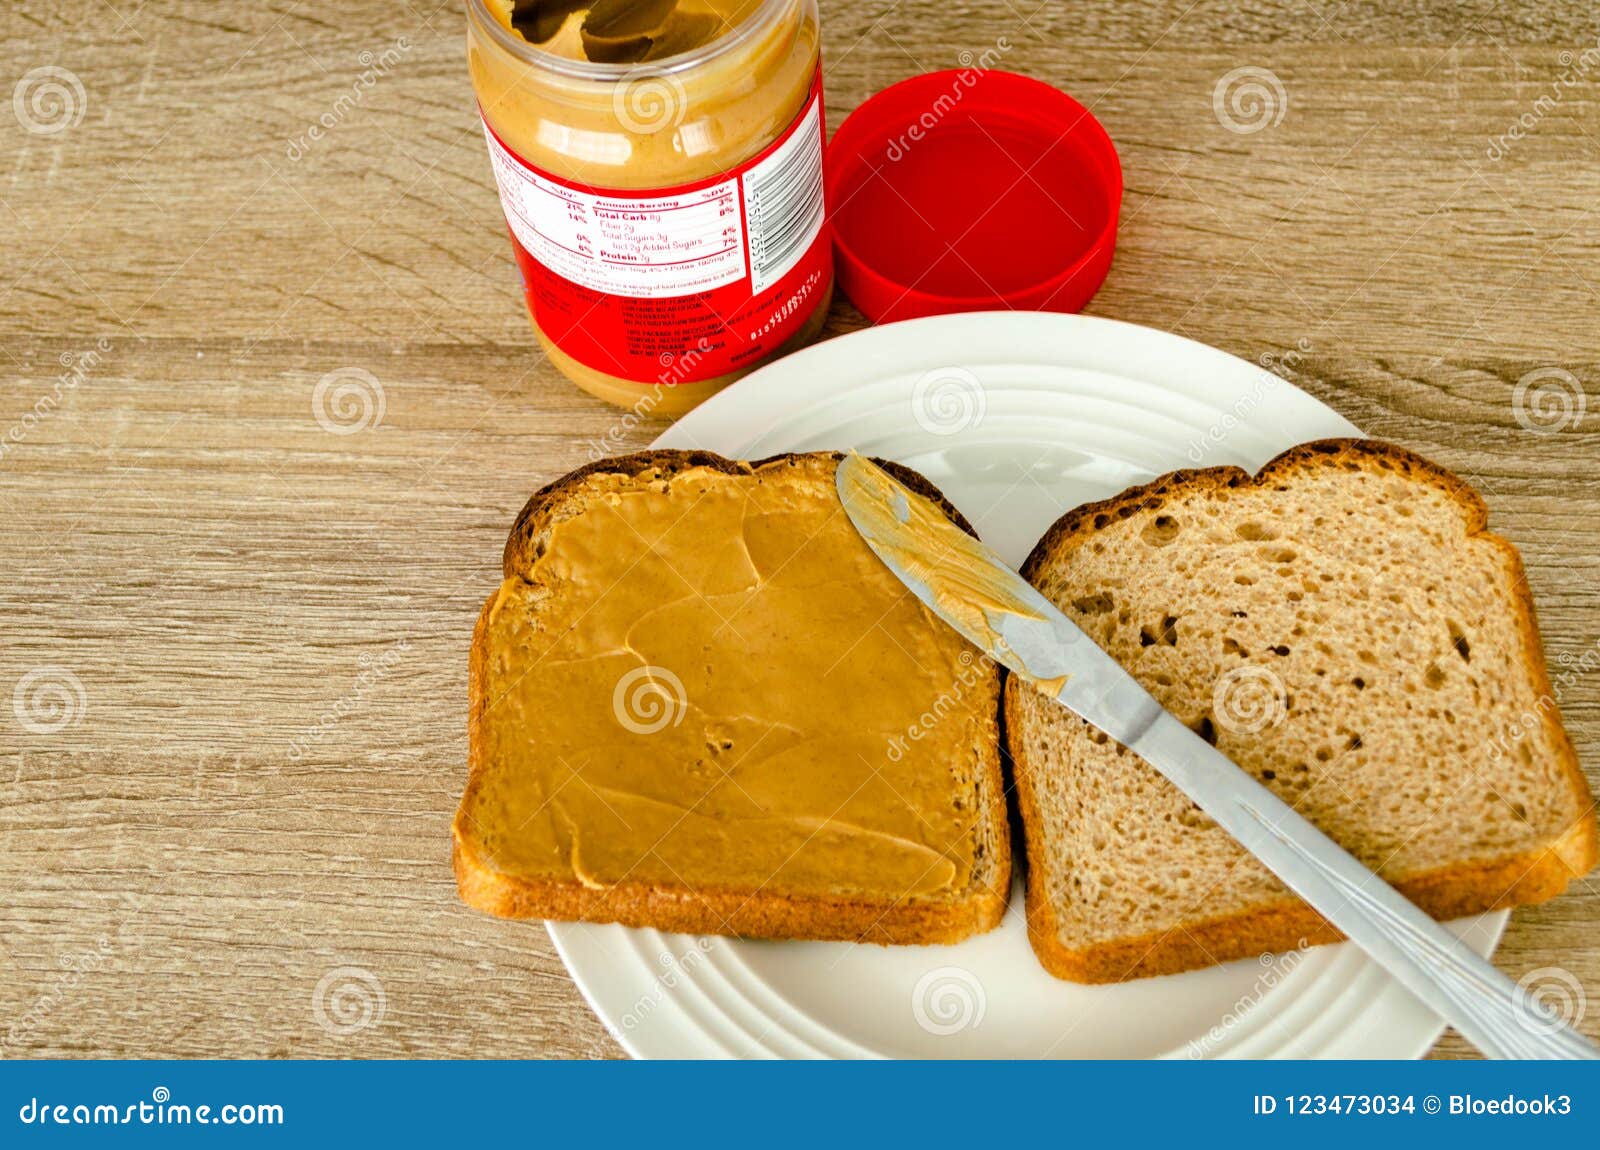 Making A Peanut Butter Sandwich Stock Photo Image Of Spread Fresh